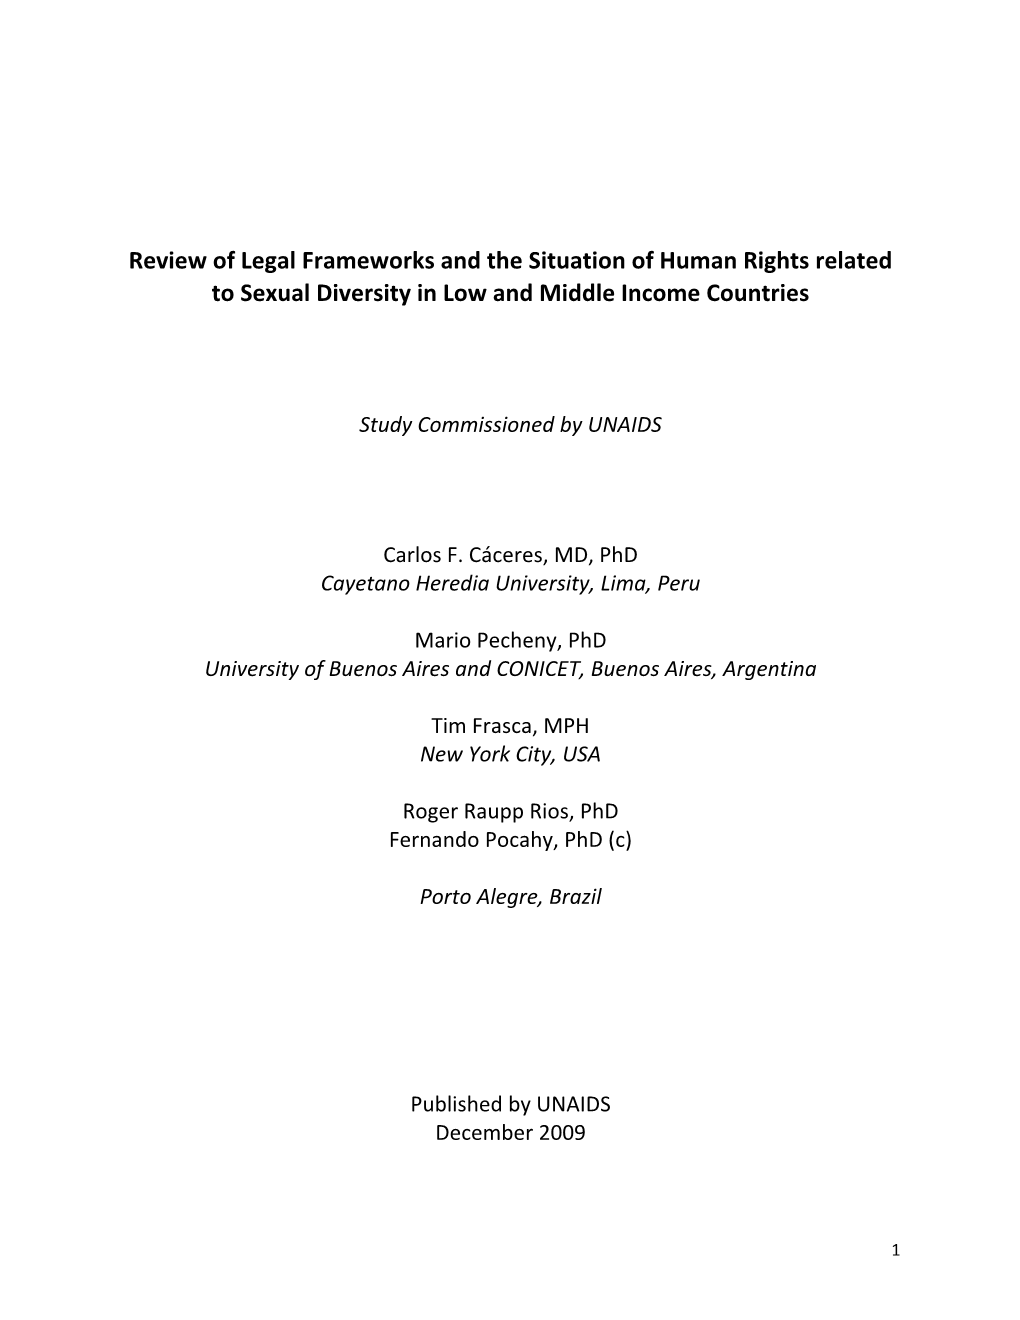 Legal Frameworks Human Rights Sexual Diversity in Low and Middle